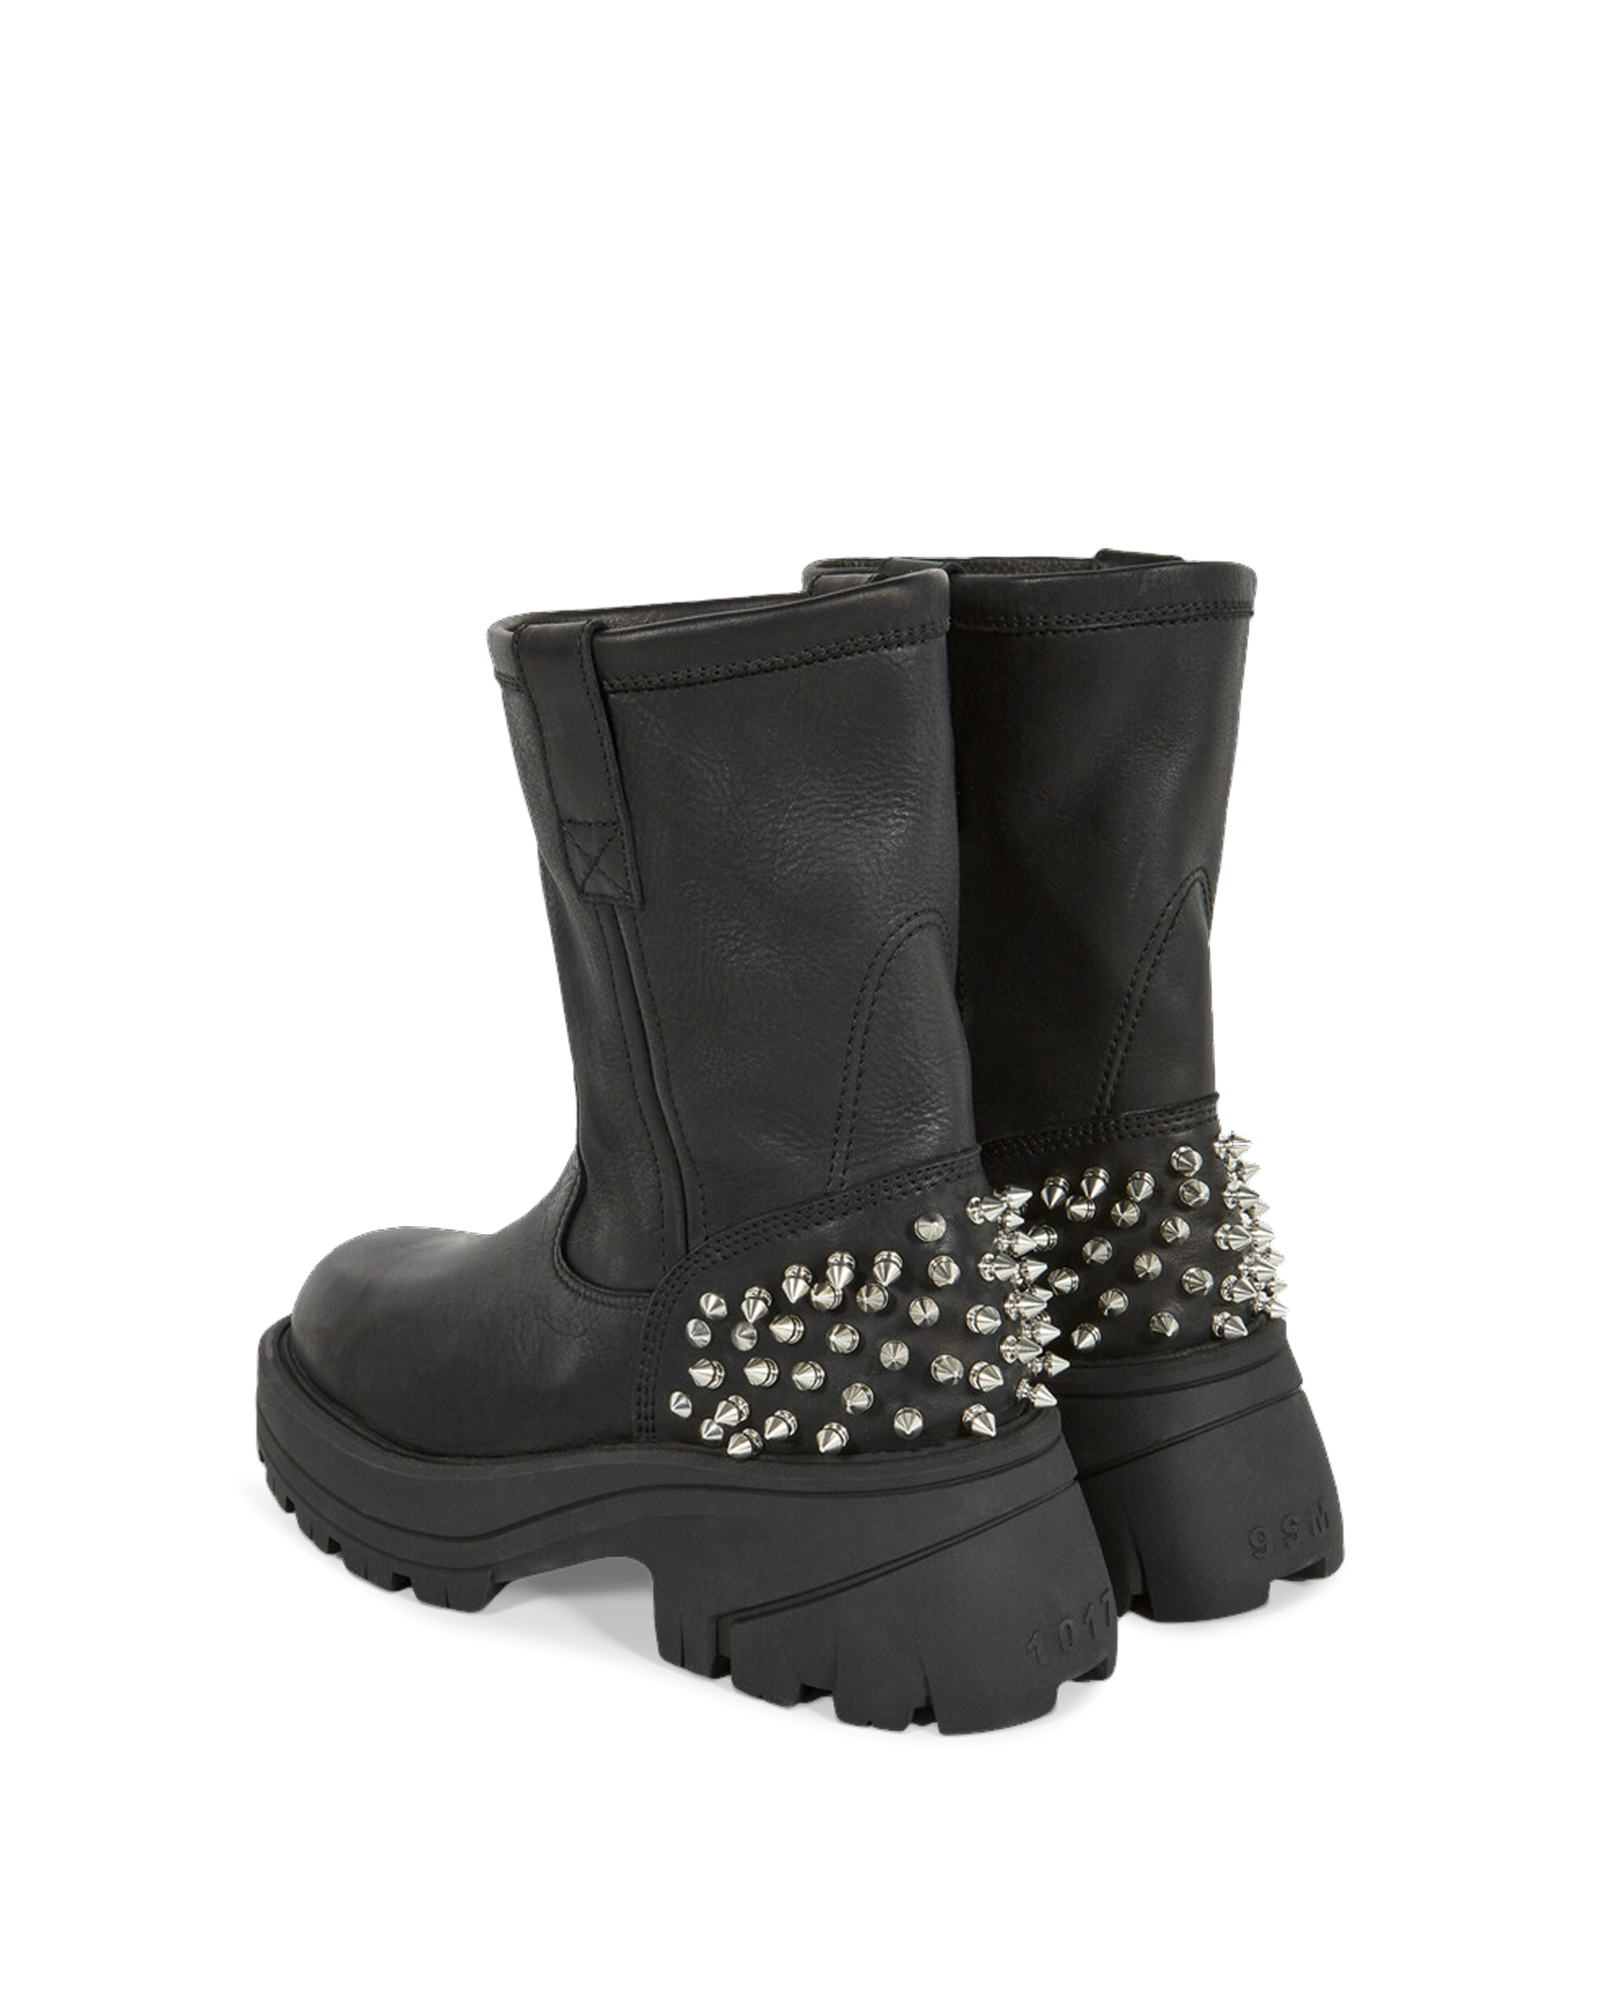 WORK BOOT WITH STUDS (C)